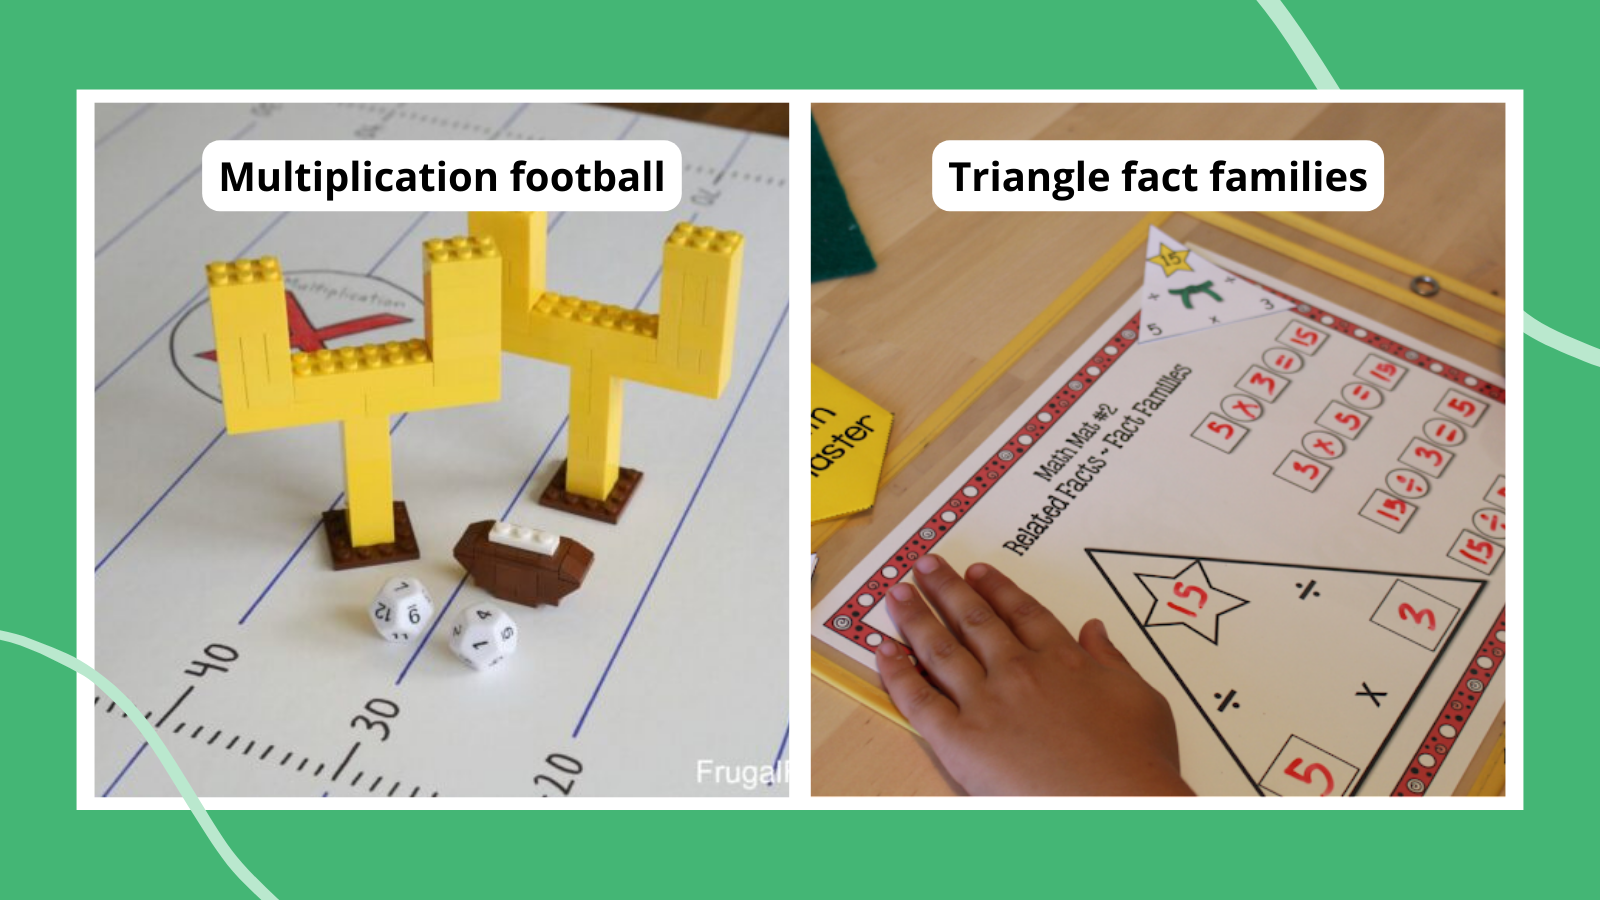 Examples of multiplication activities like LEGO football game and triangle fact families worksheet.